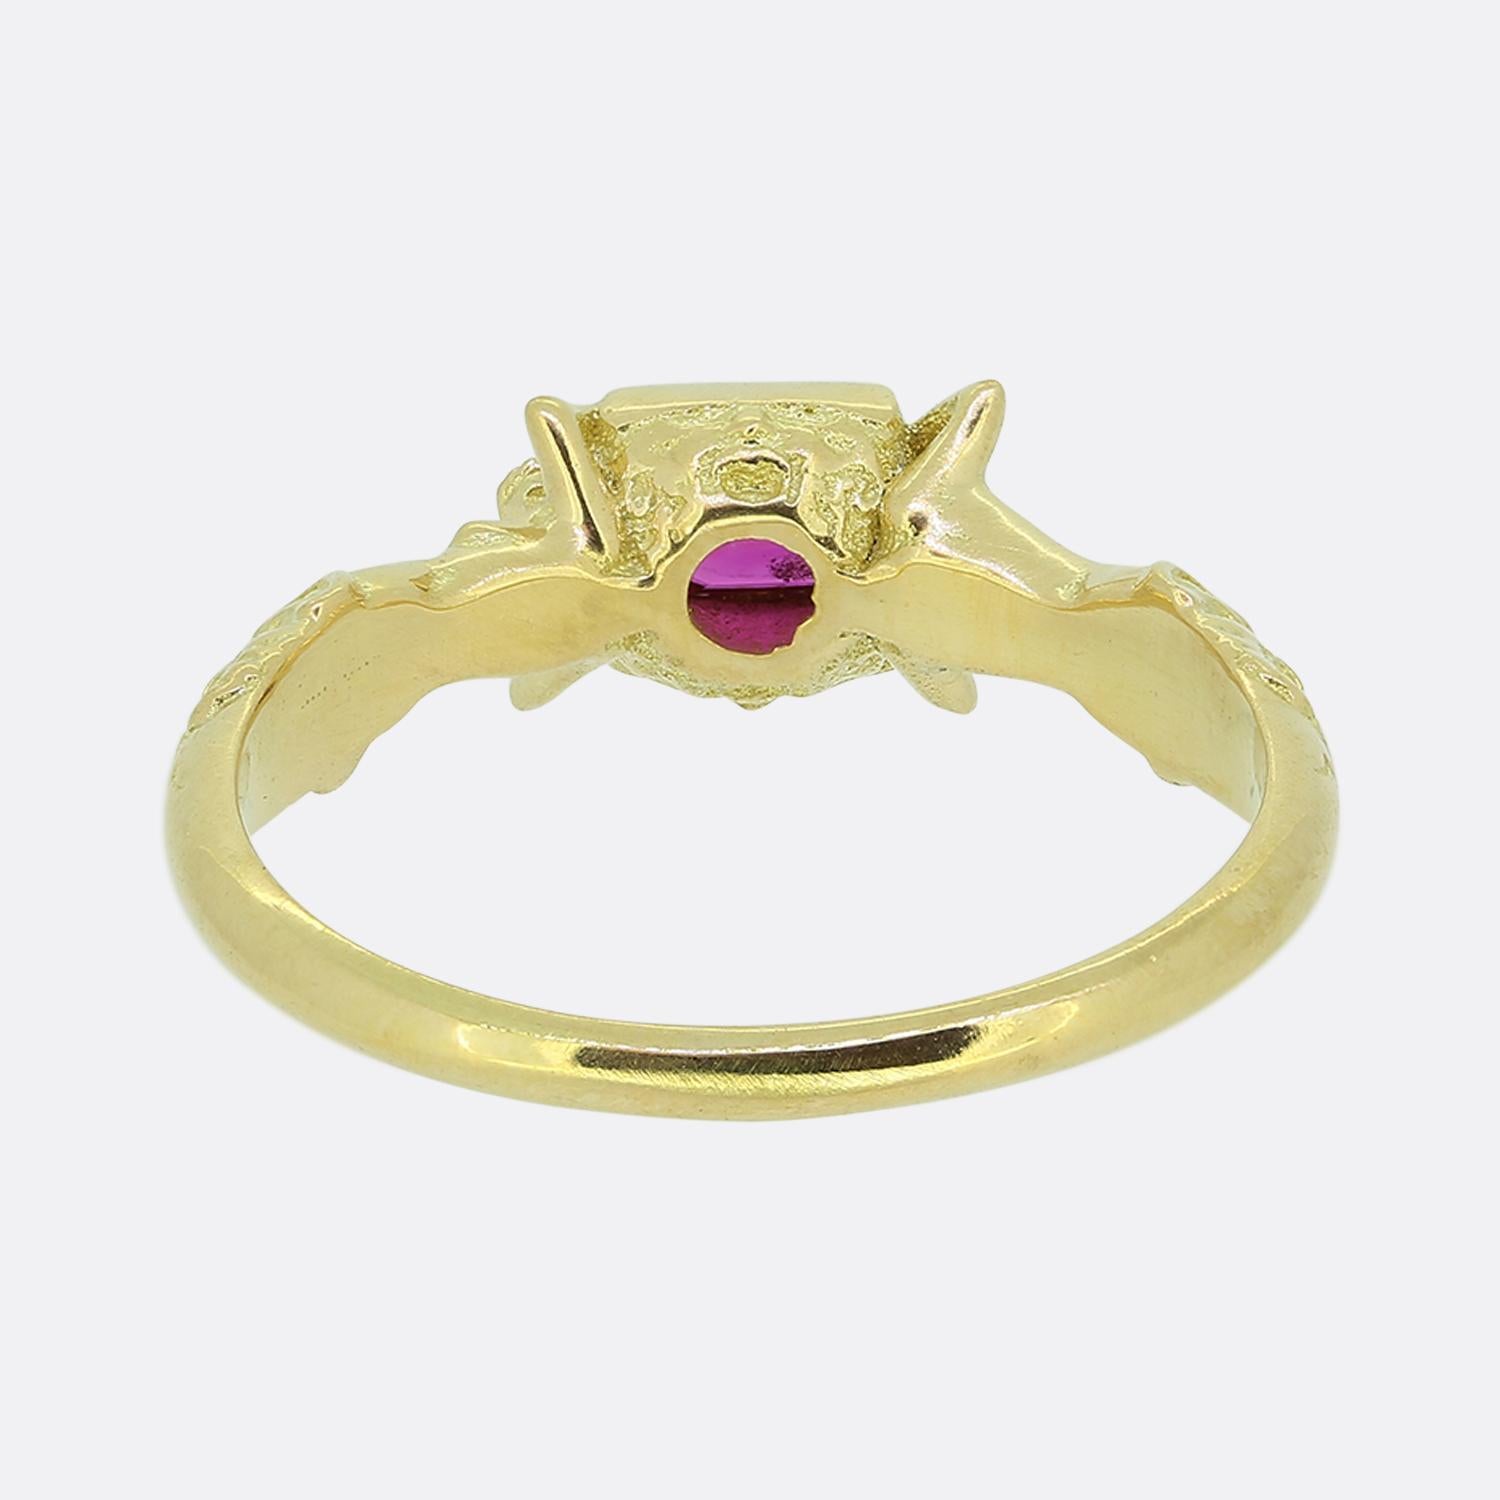 Renaissance Revival Burmese Ruby Ring In Good Condition For Sale In London, GB